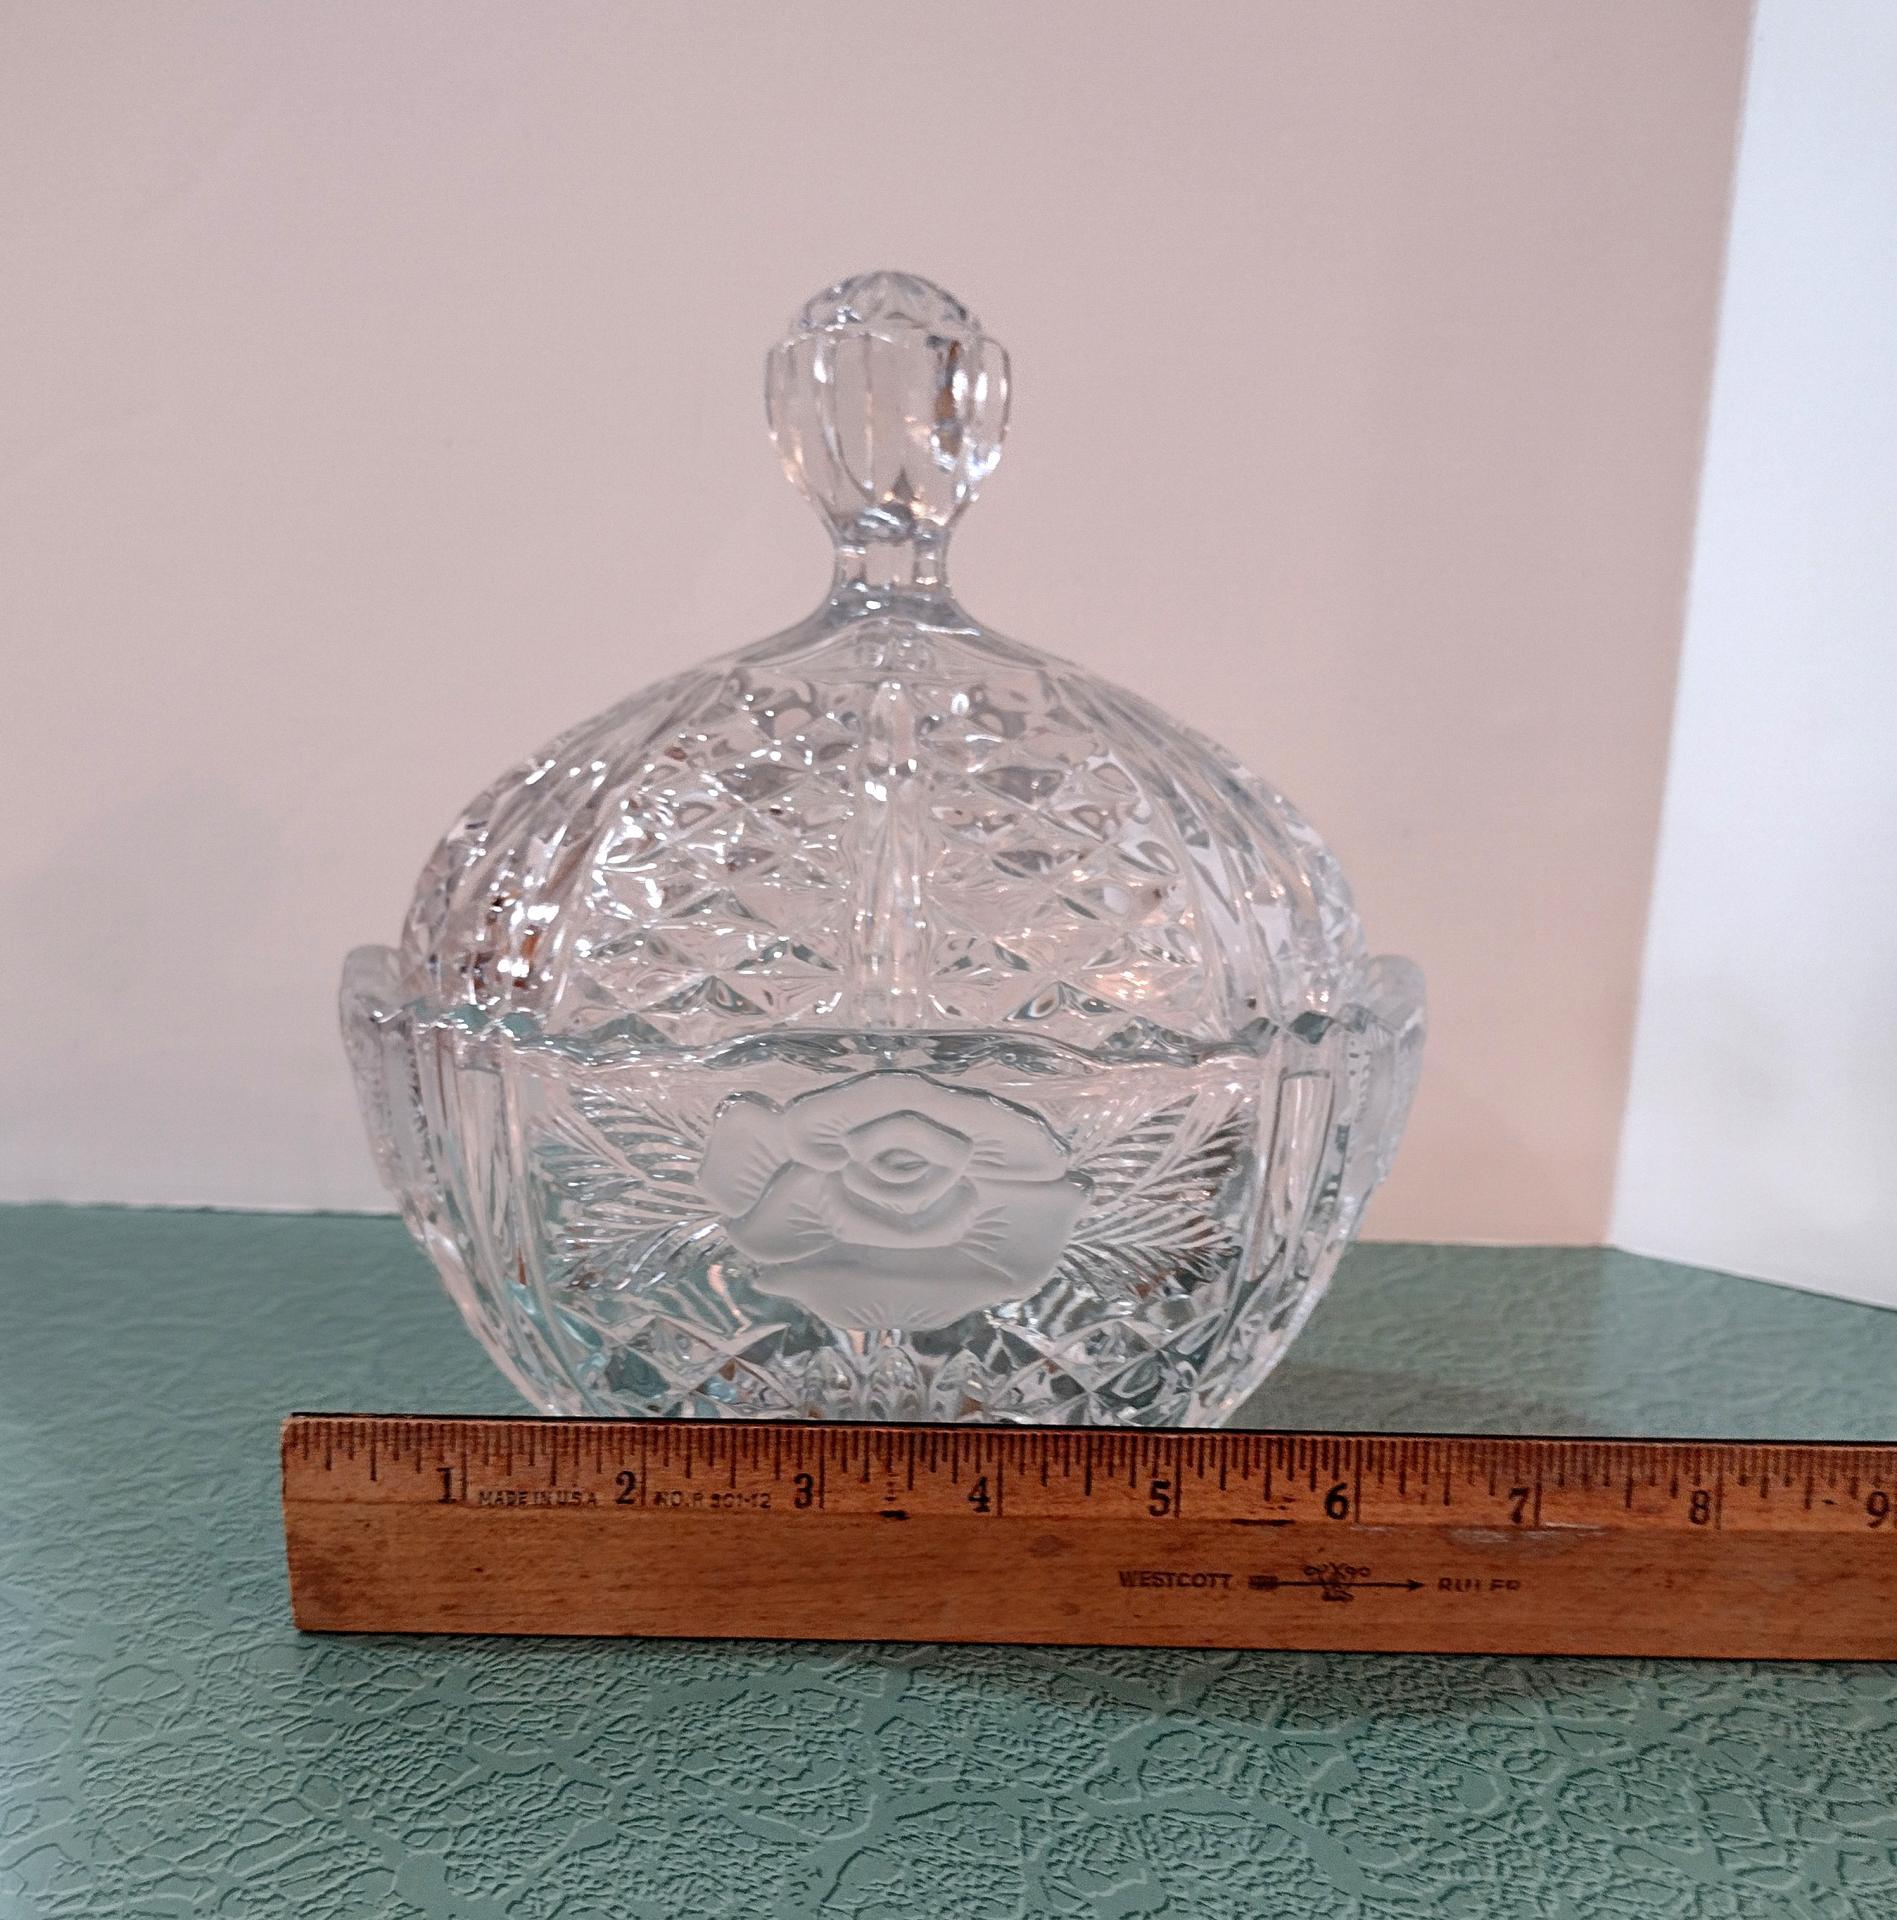 Vintage Lead Crystal Oval Candy Dish with Lid